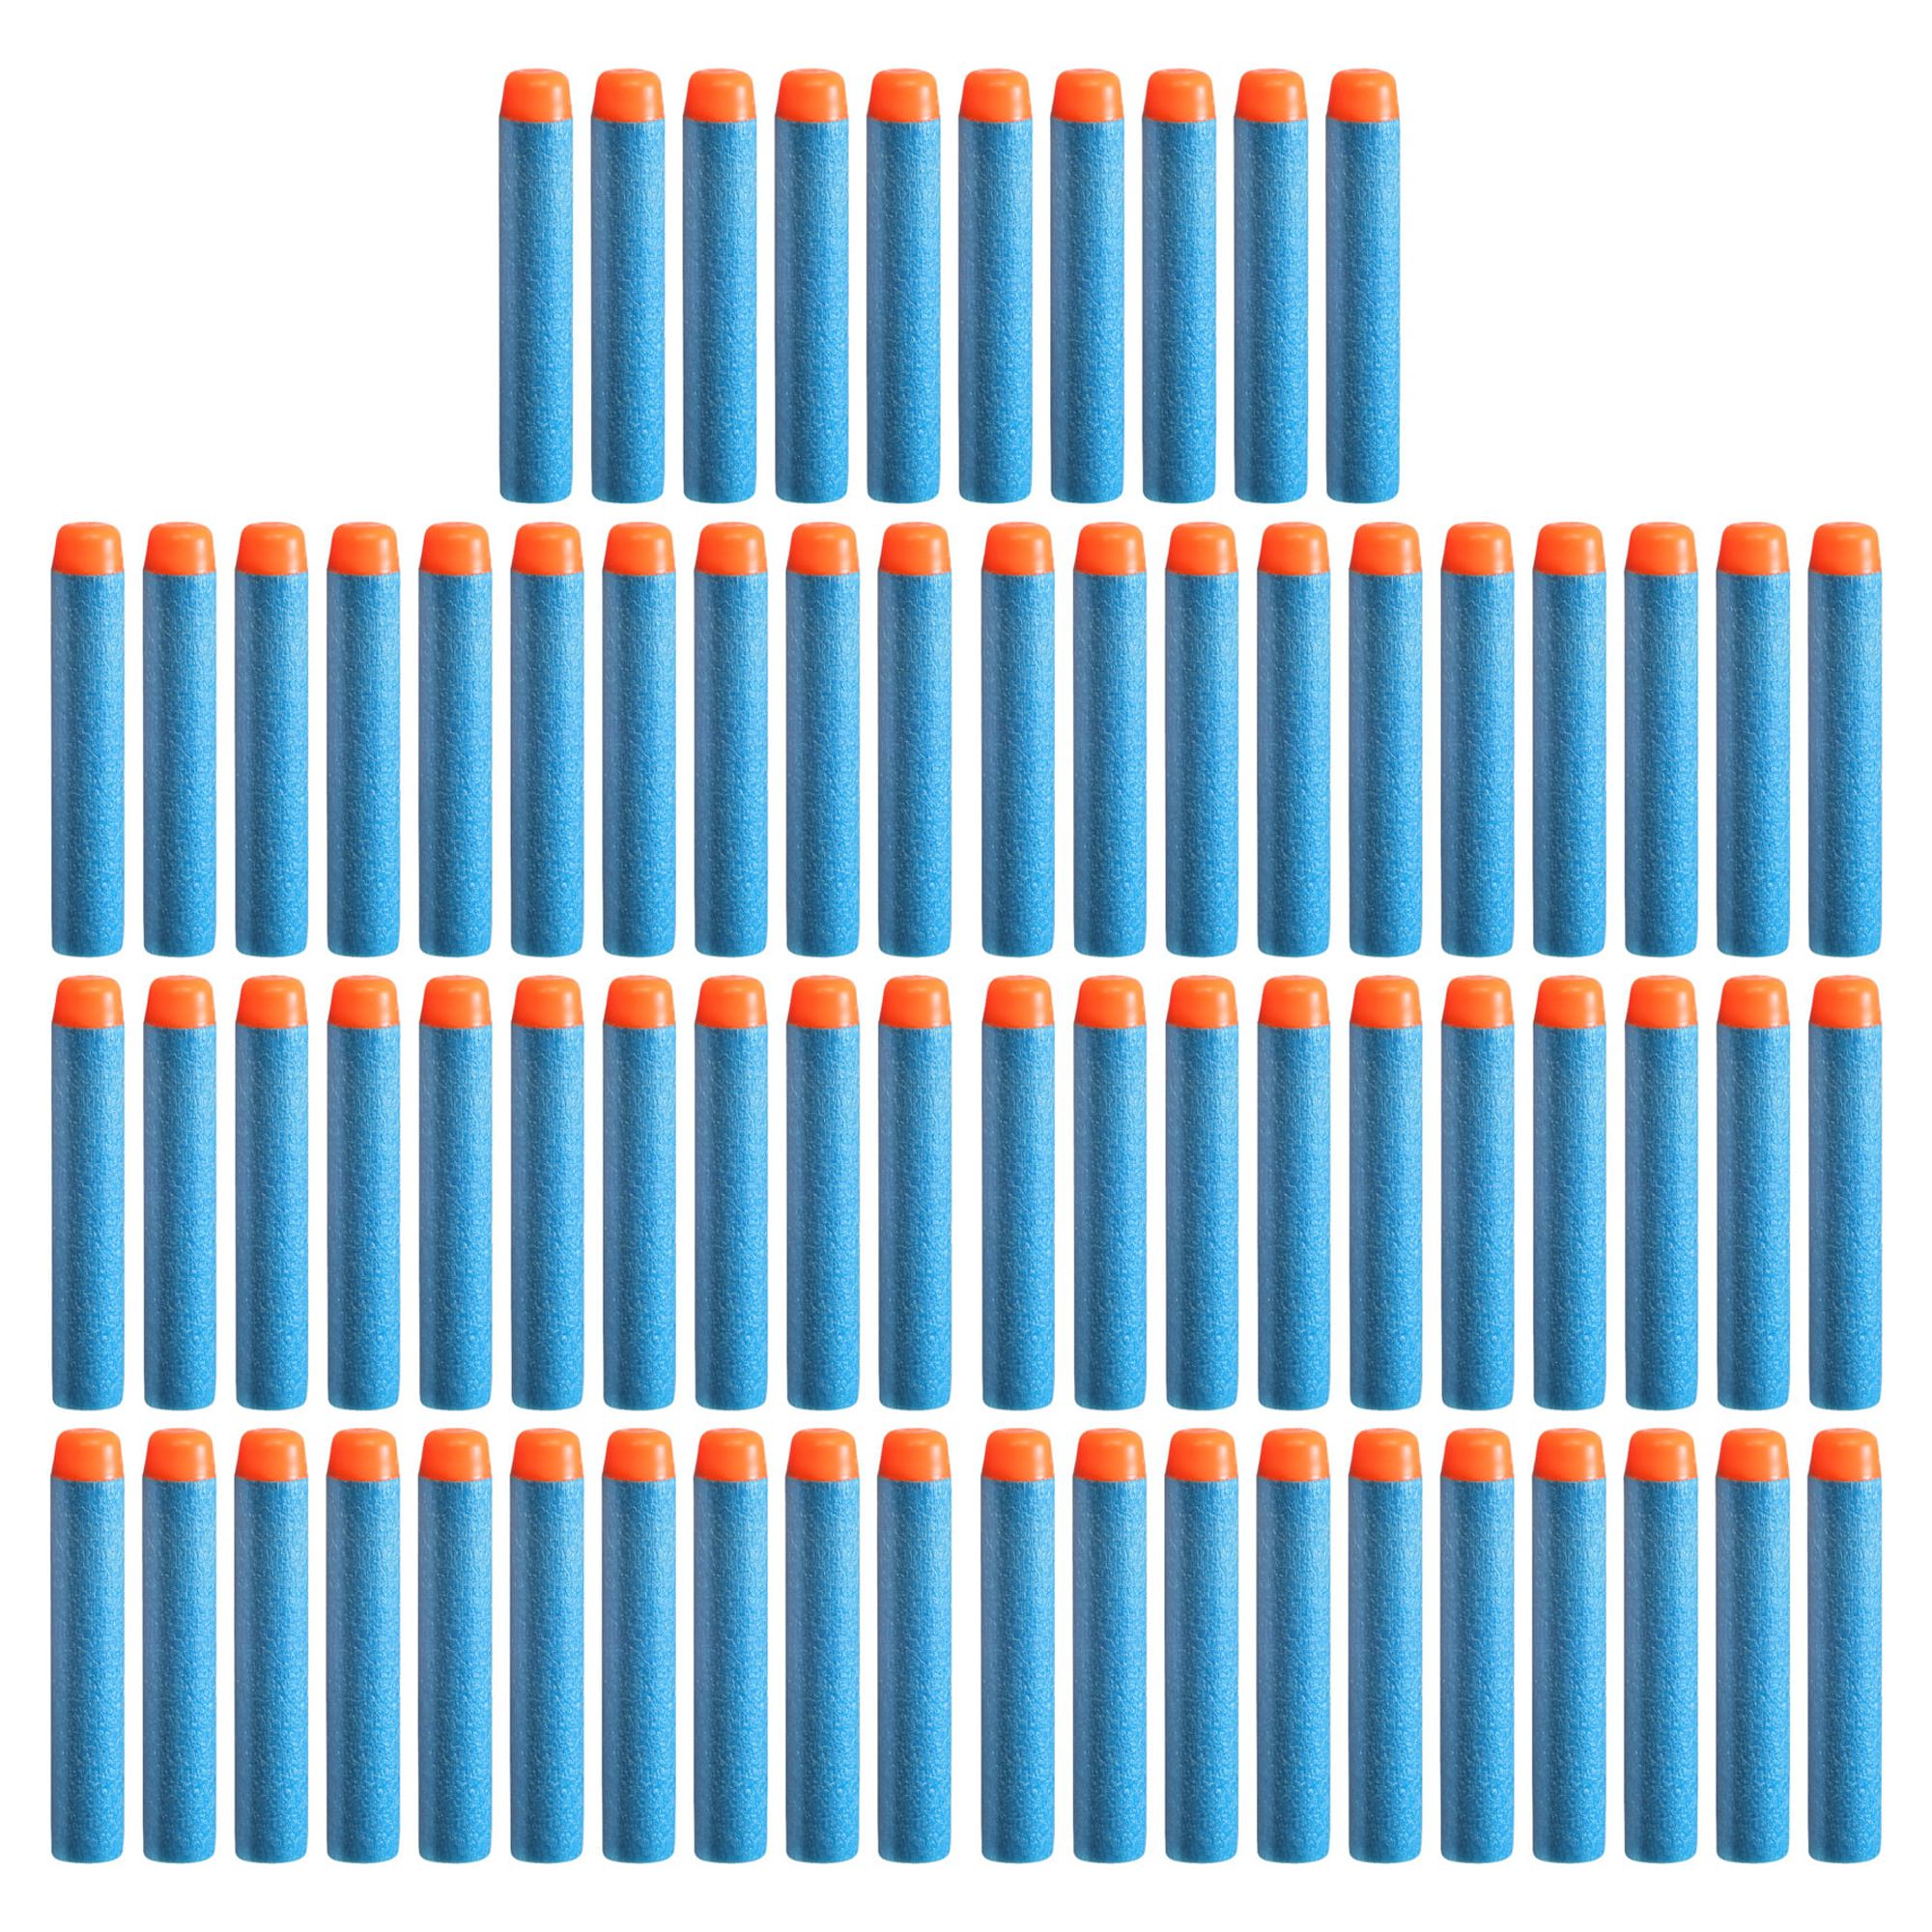 Nerf Elite 2.0 Kids Toy Blaster Refill Pack with 70 Darts, Only At Walmart - image 3 of 4